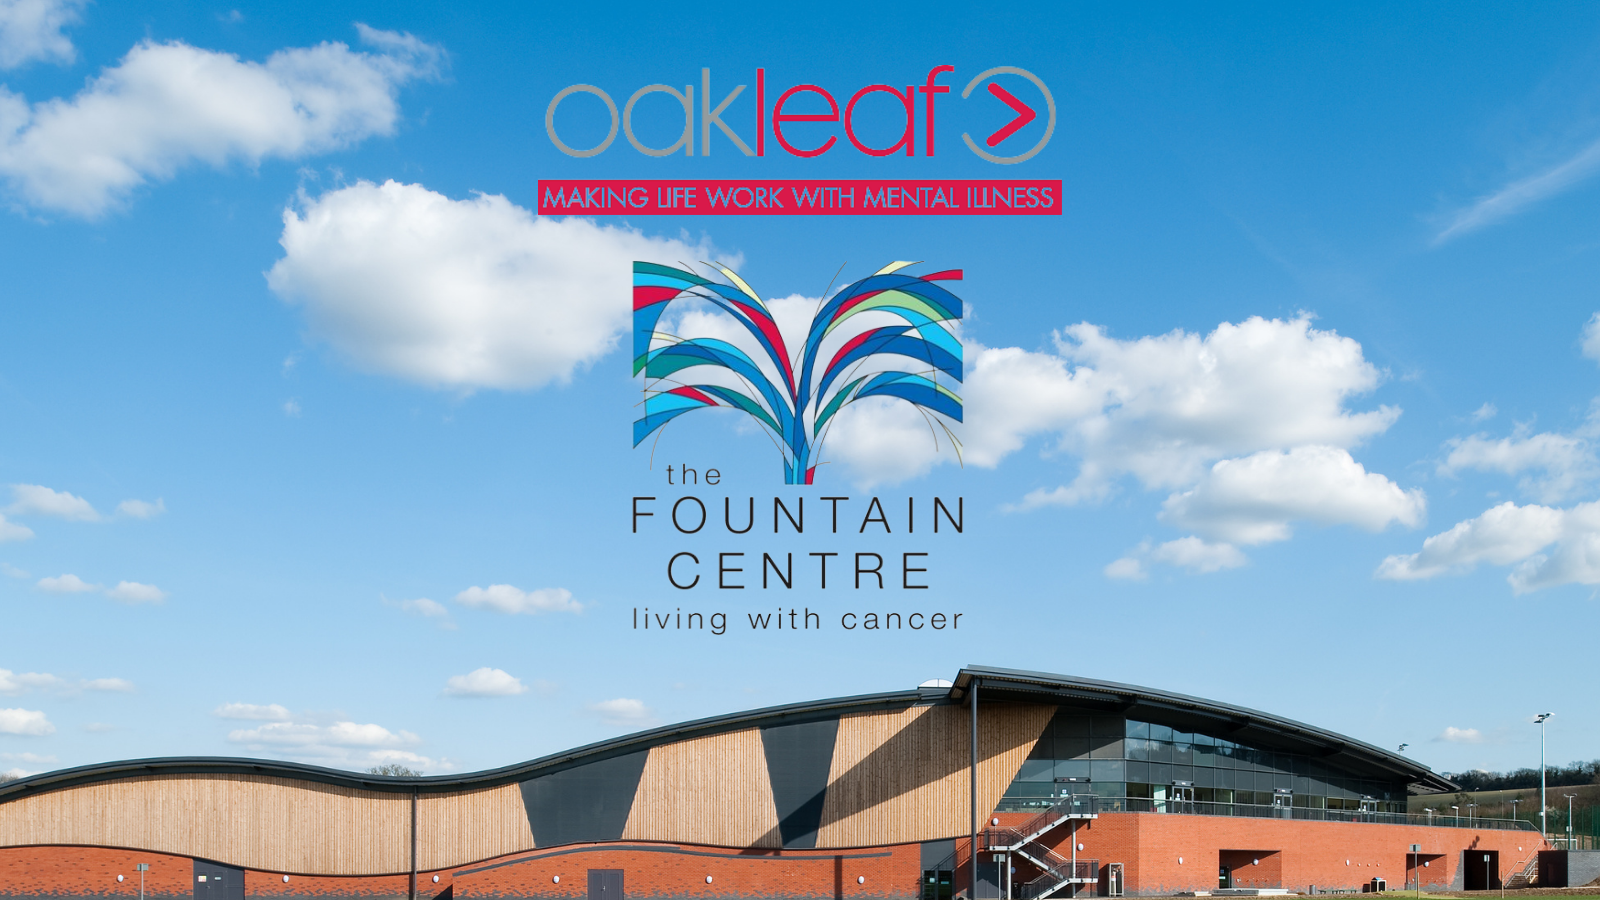 SSP partners with local charities Oakleaf and The Fountain Centre